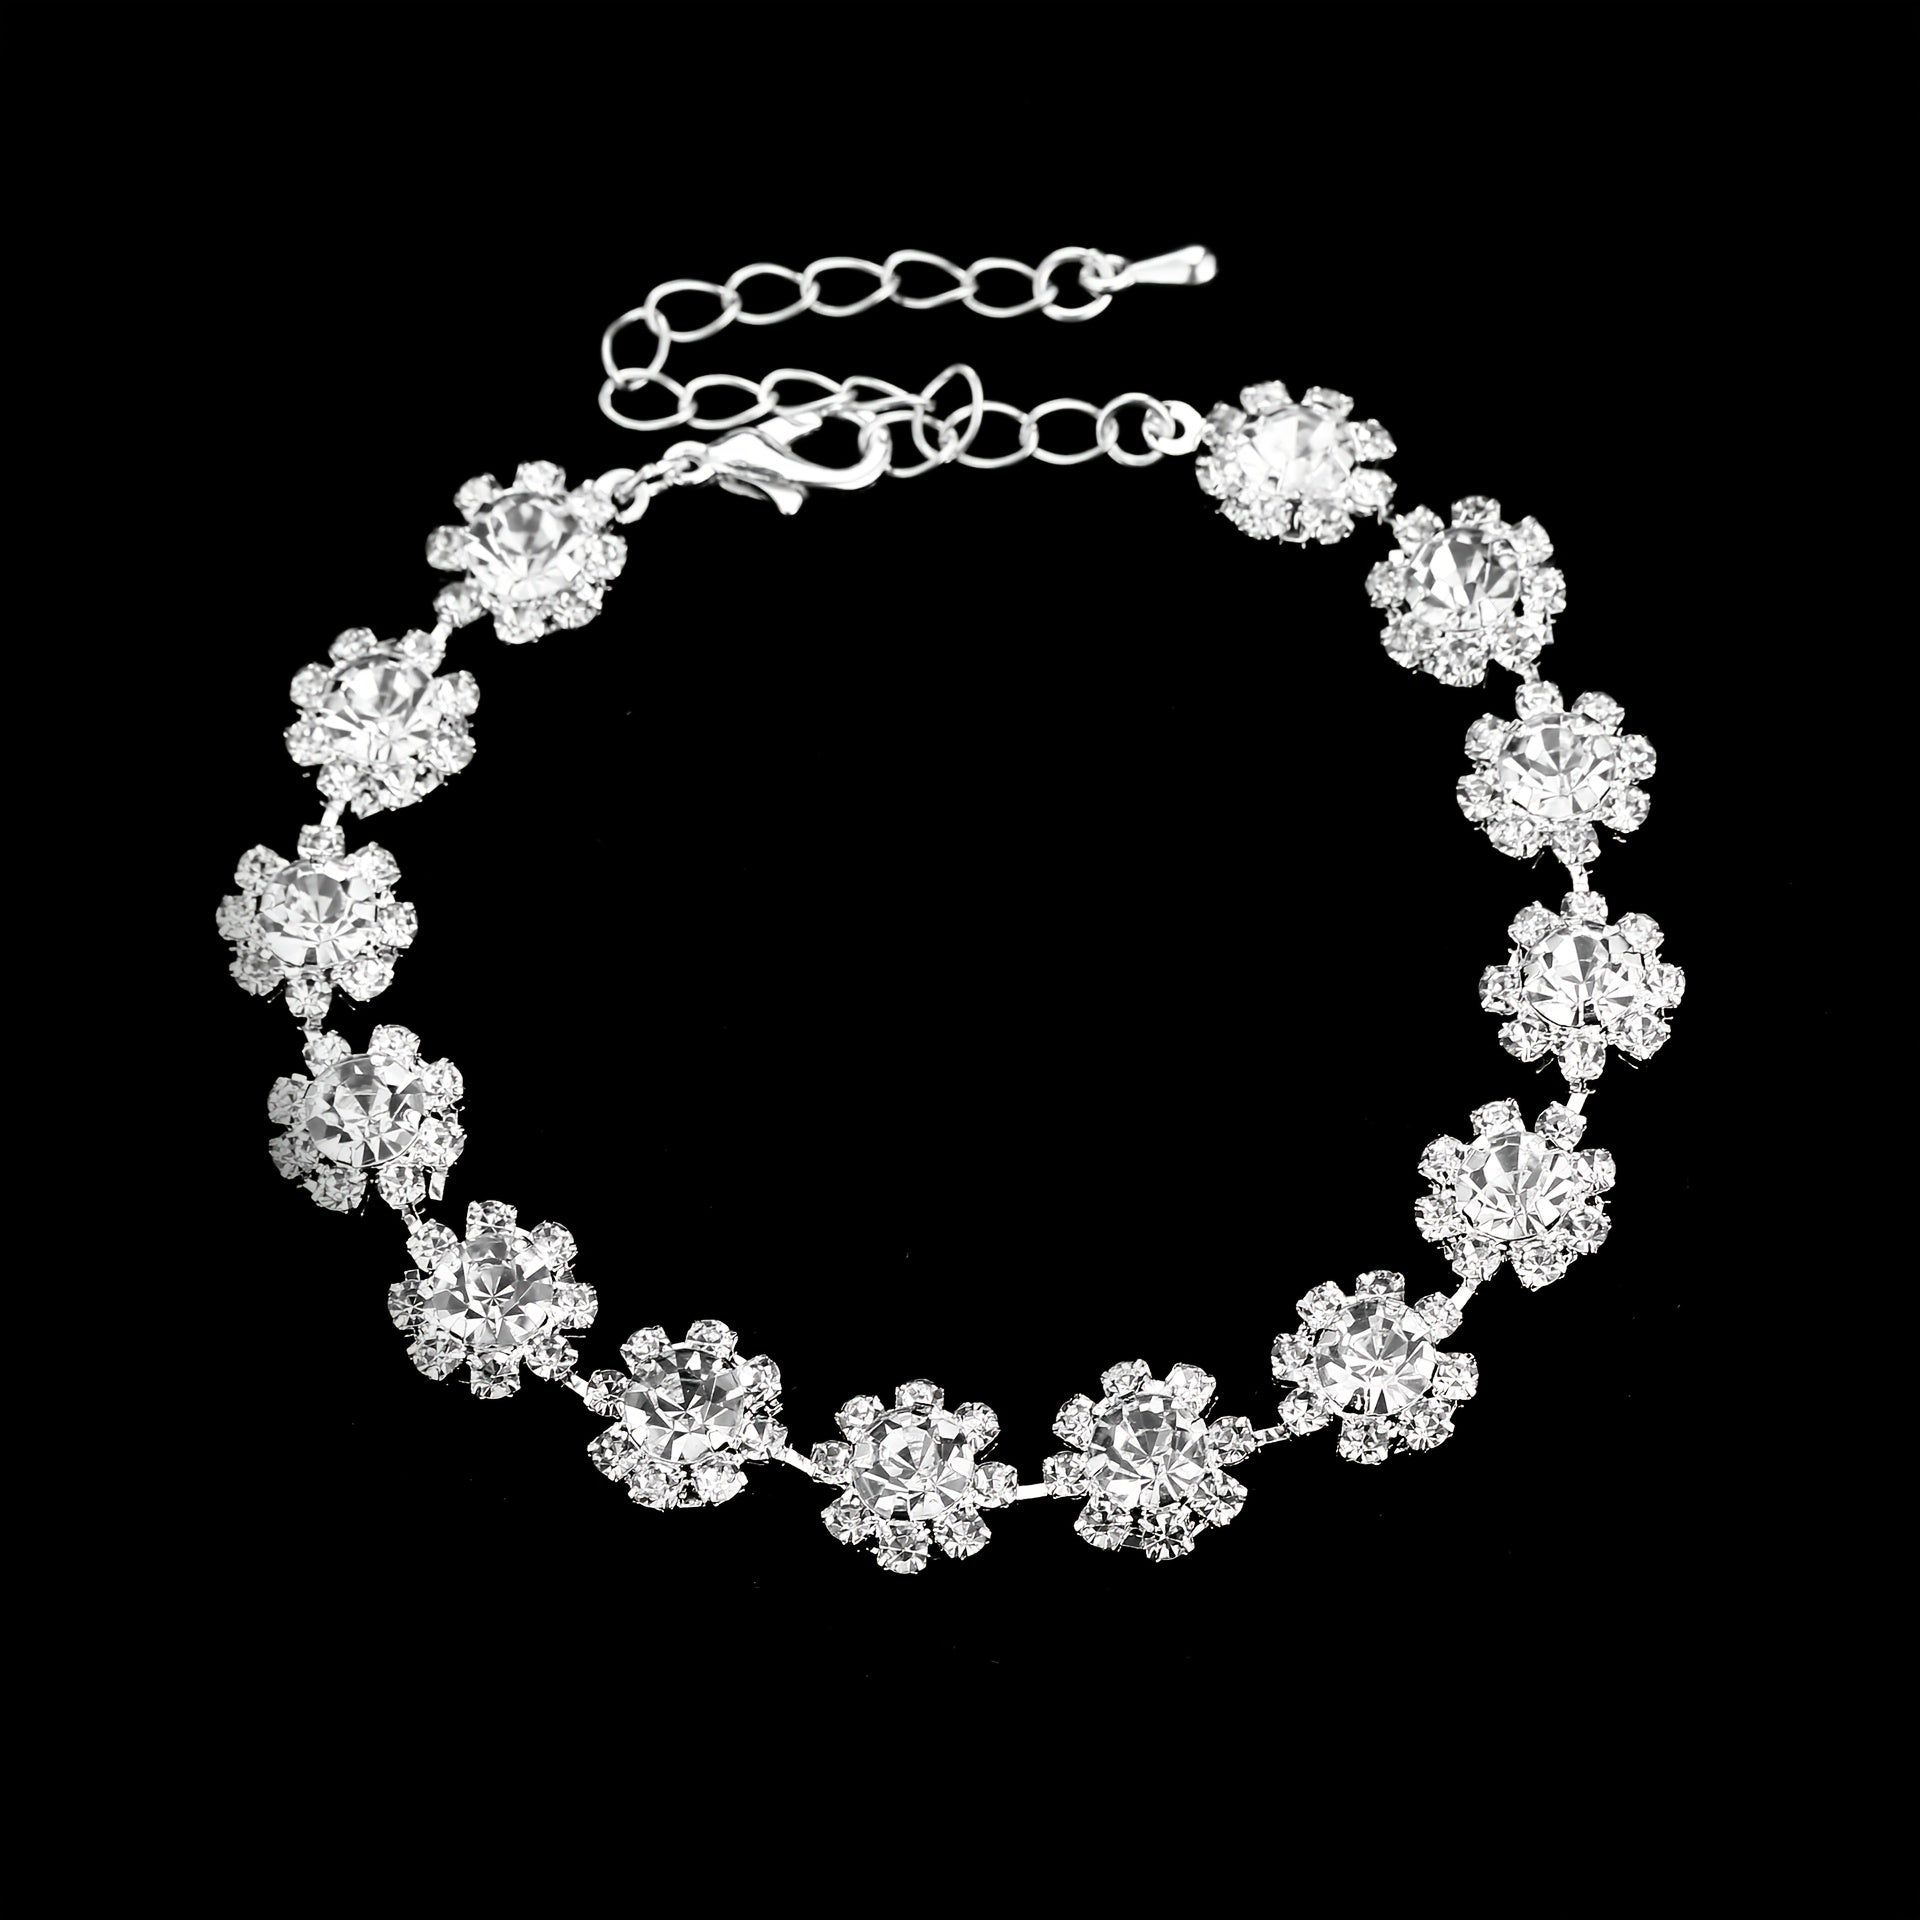 Elegant Flower-Shaped Zircon Jewelry Set for Women - Perfect for Parties and Proms